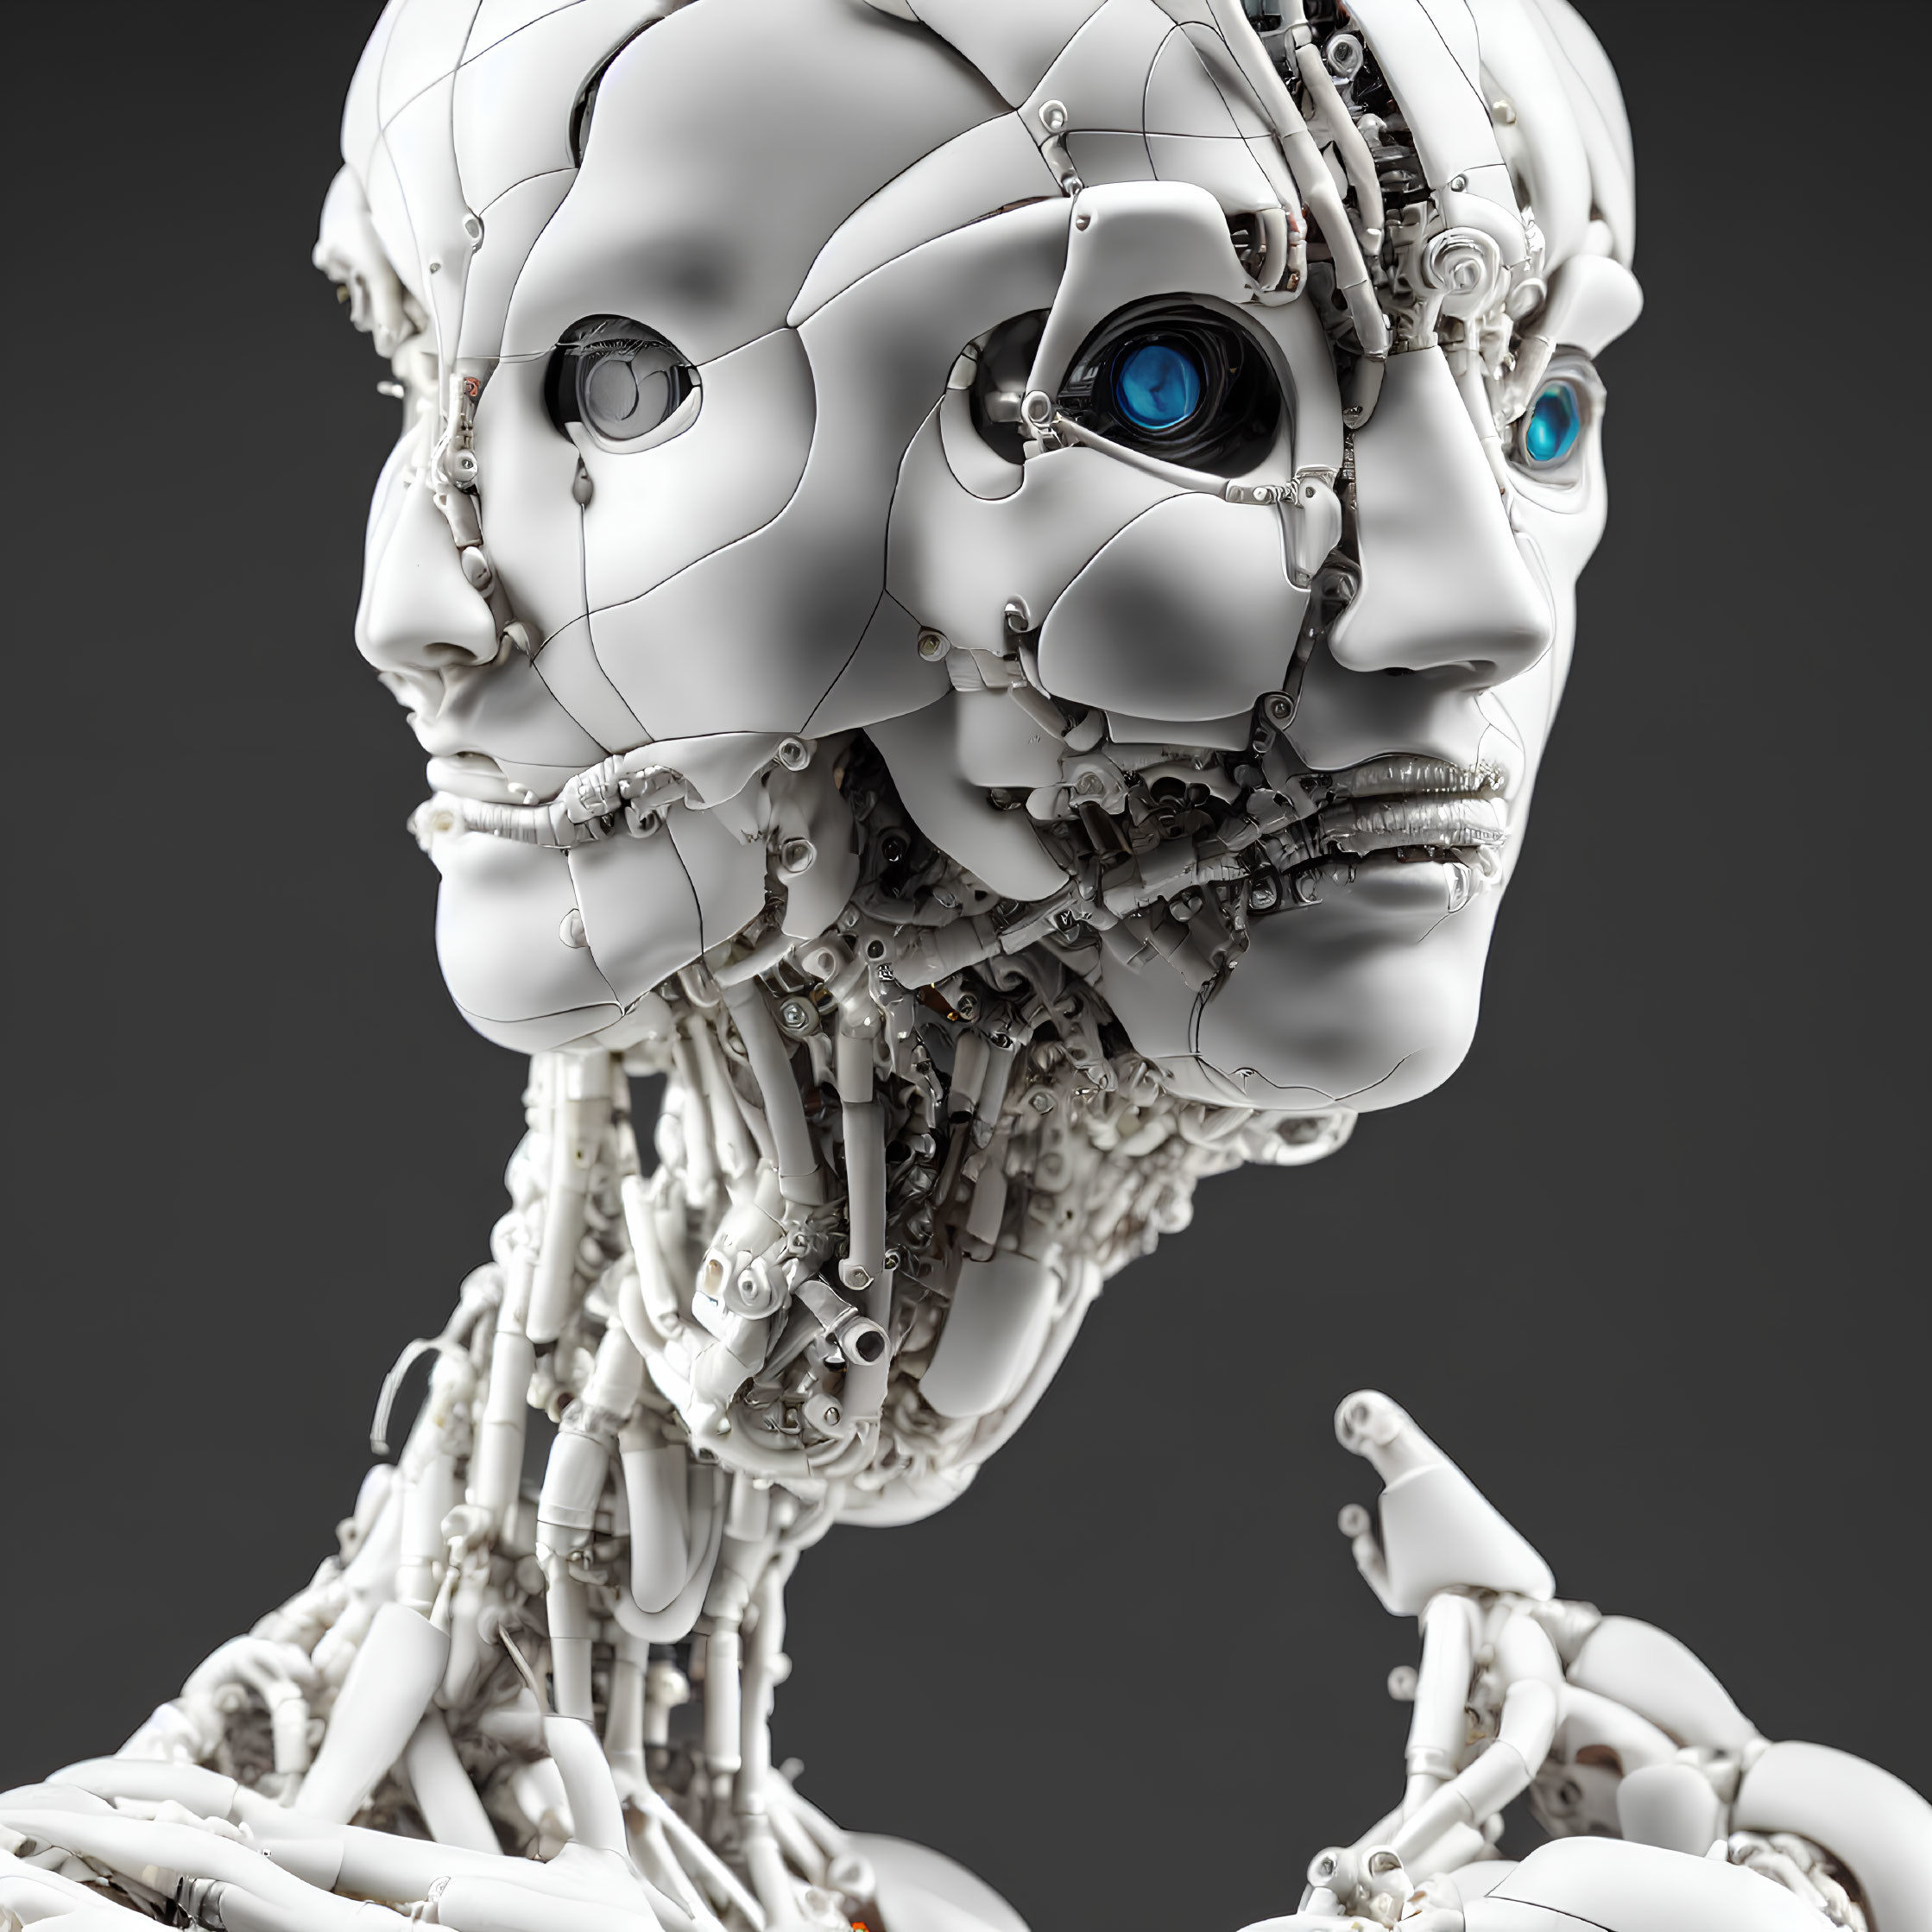 Detailed Close-Up of Humanoid Robot Head and Shoulders with Intricate Mechanical Parts and Blue Eye on